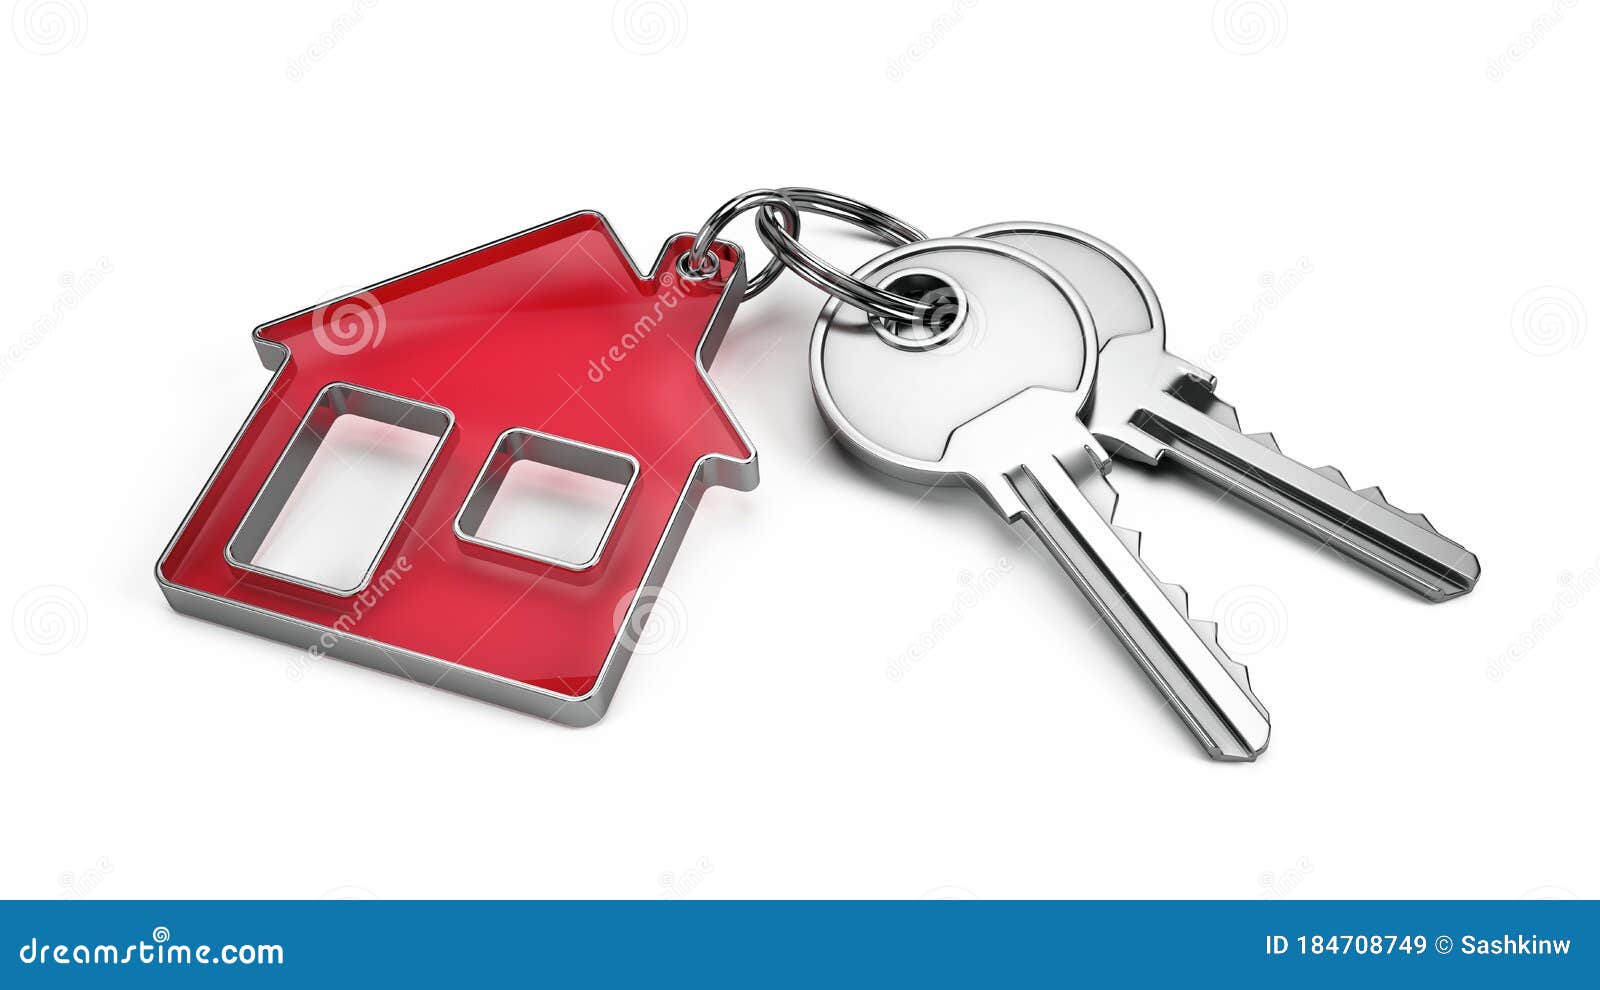 key to a new home concept - house keys with trinket house  on white